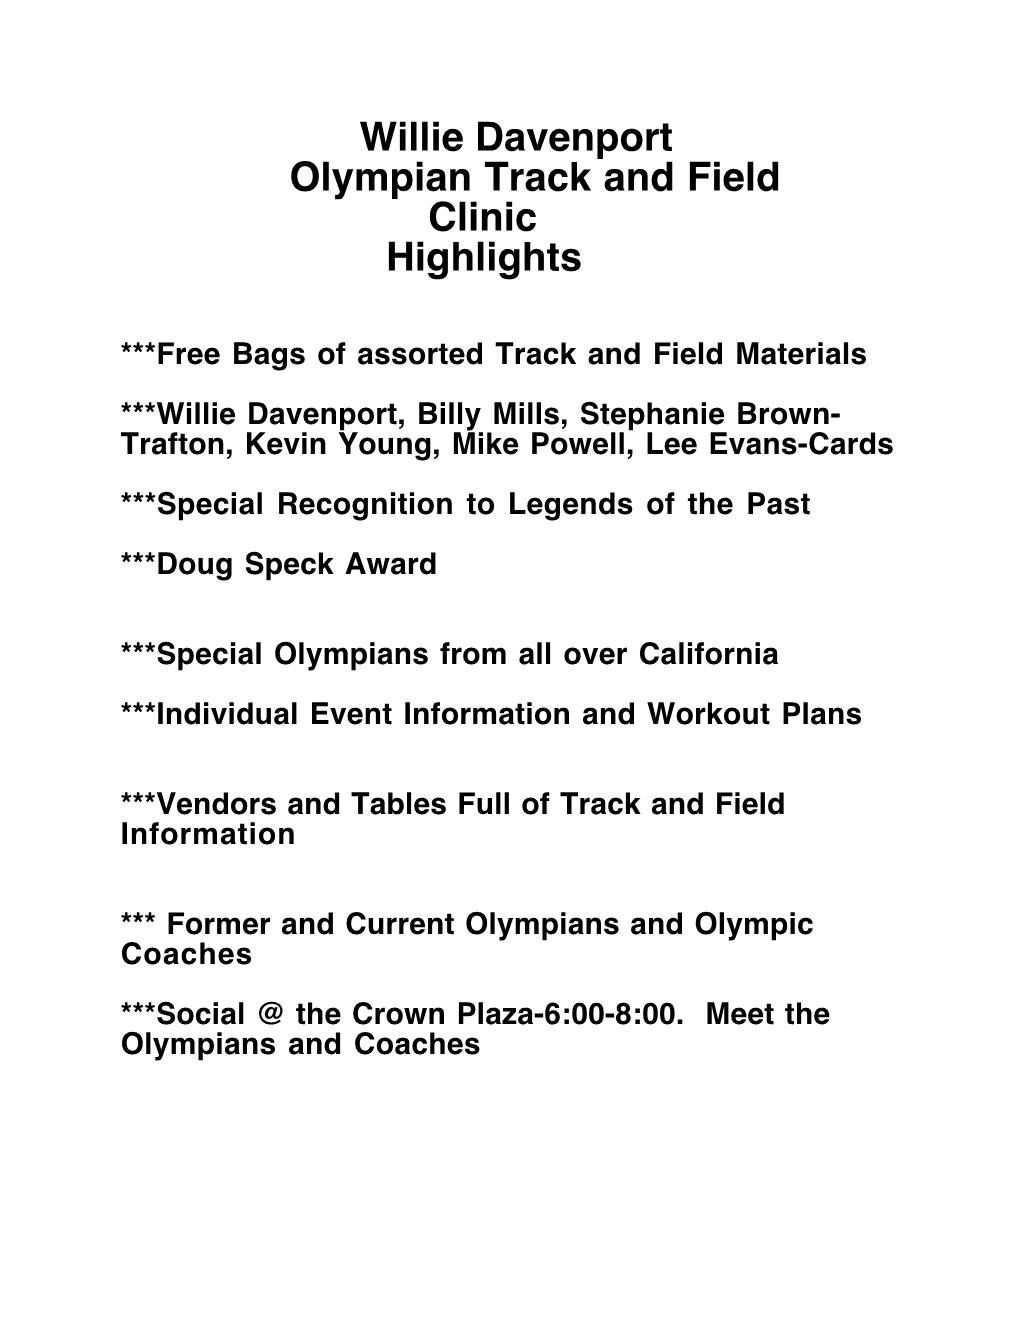 Willie Davenport Olympian Track and Field Clinic Highlights